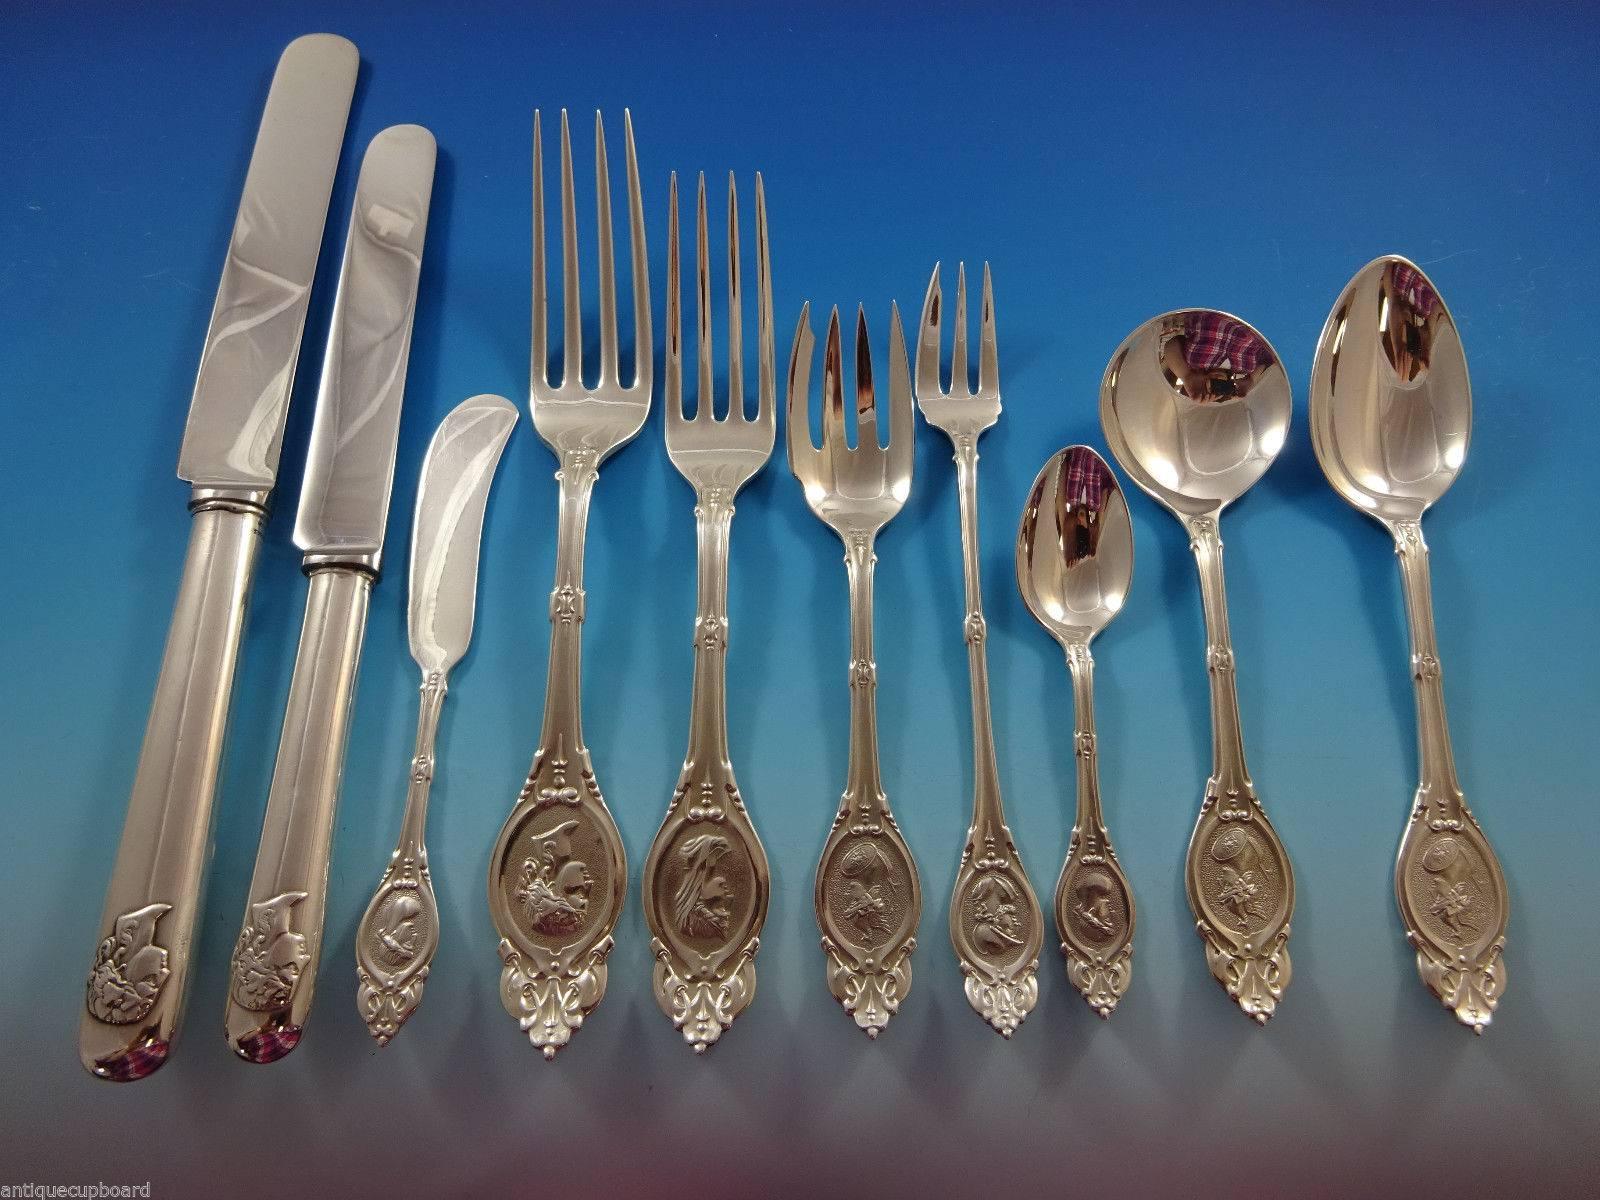 Medallion by Shiebler/Polhamus.
 

Massive 181 piece Sterling silver Flatware set in the pattern Medallion by Polhamus/Shiebler, circa 1860s. Shiebler acquired the John Polhamus flatware dies about the year 1865. This rare vintage, figural,